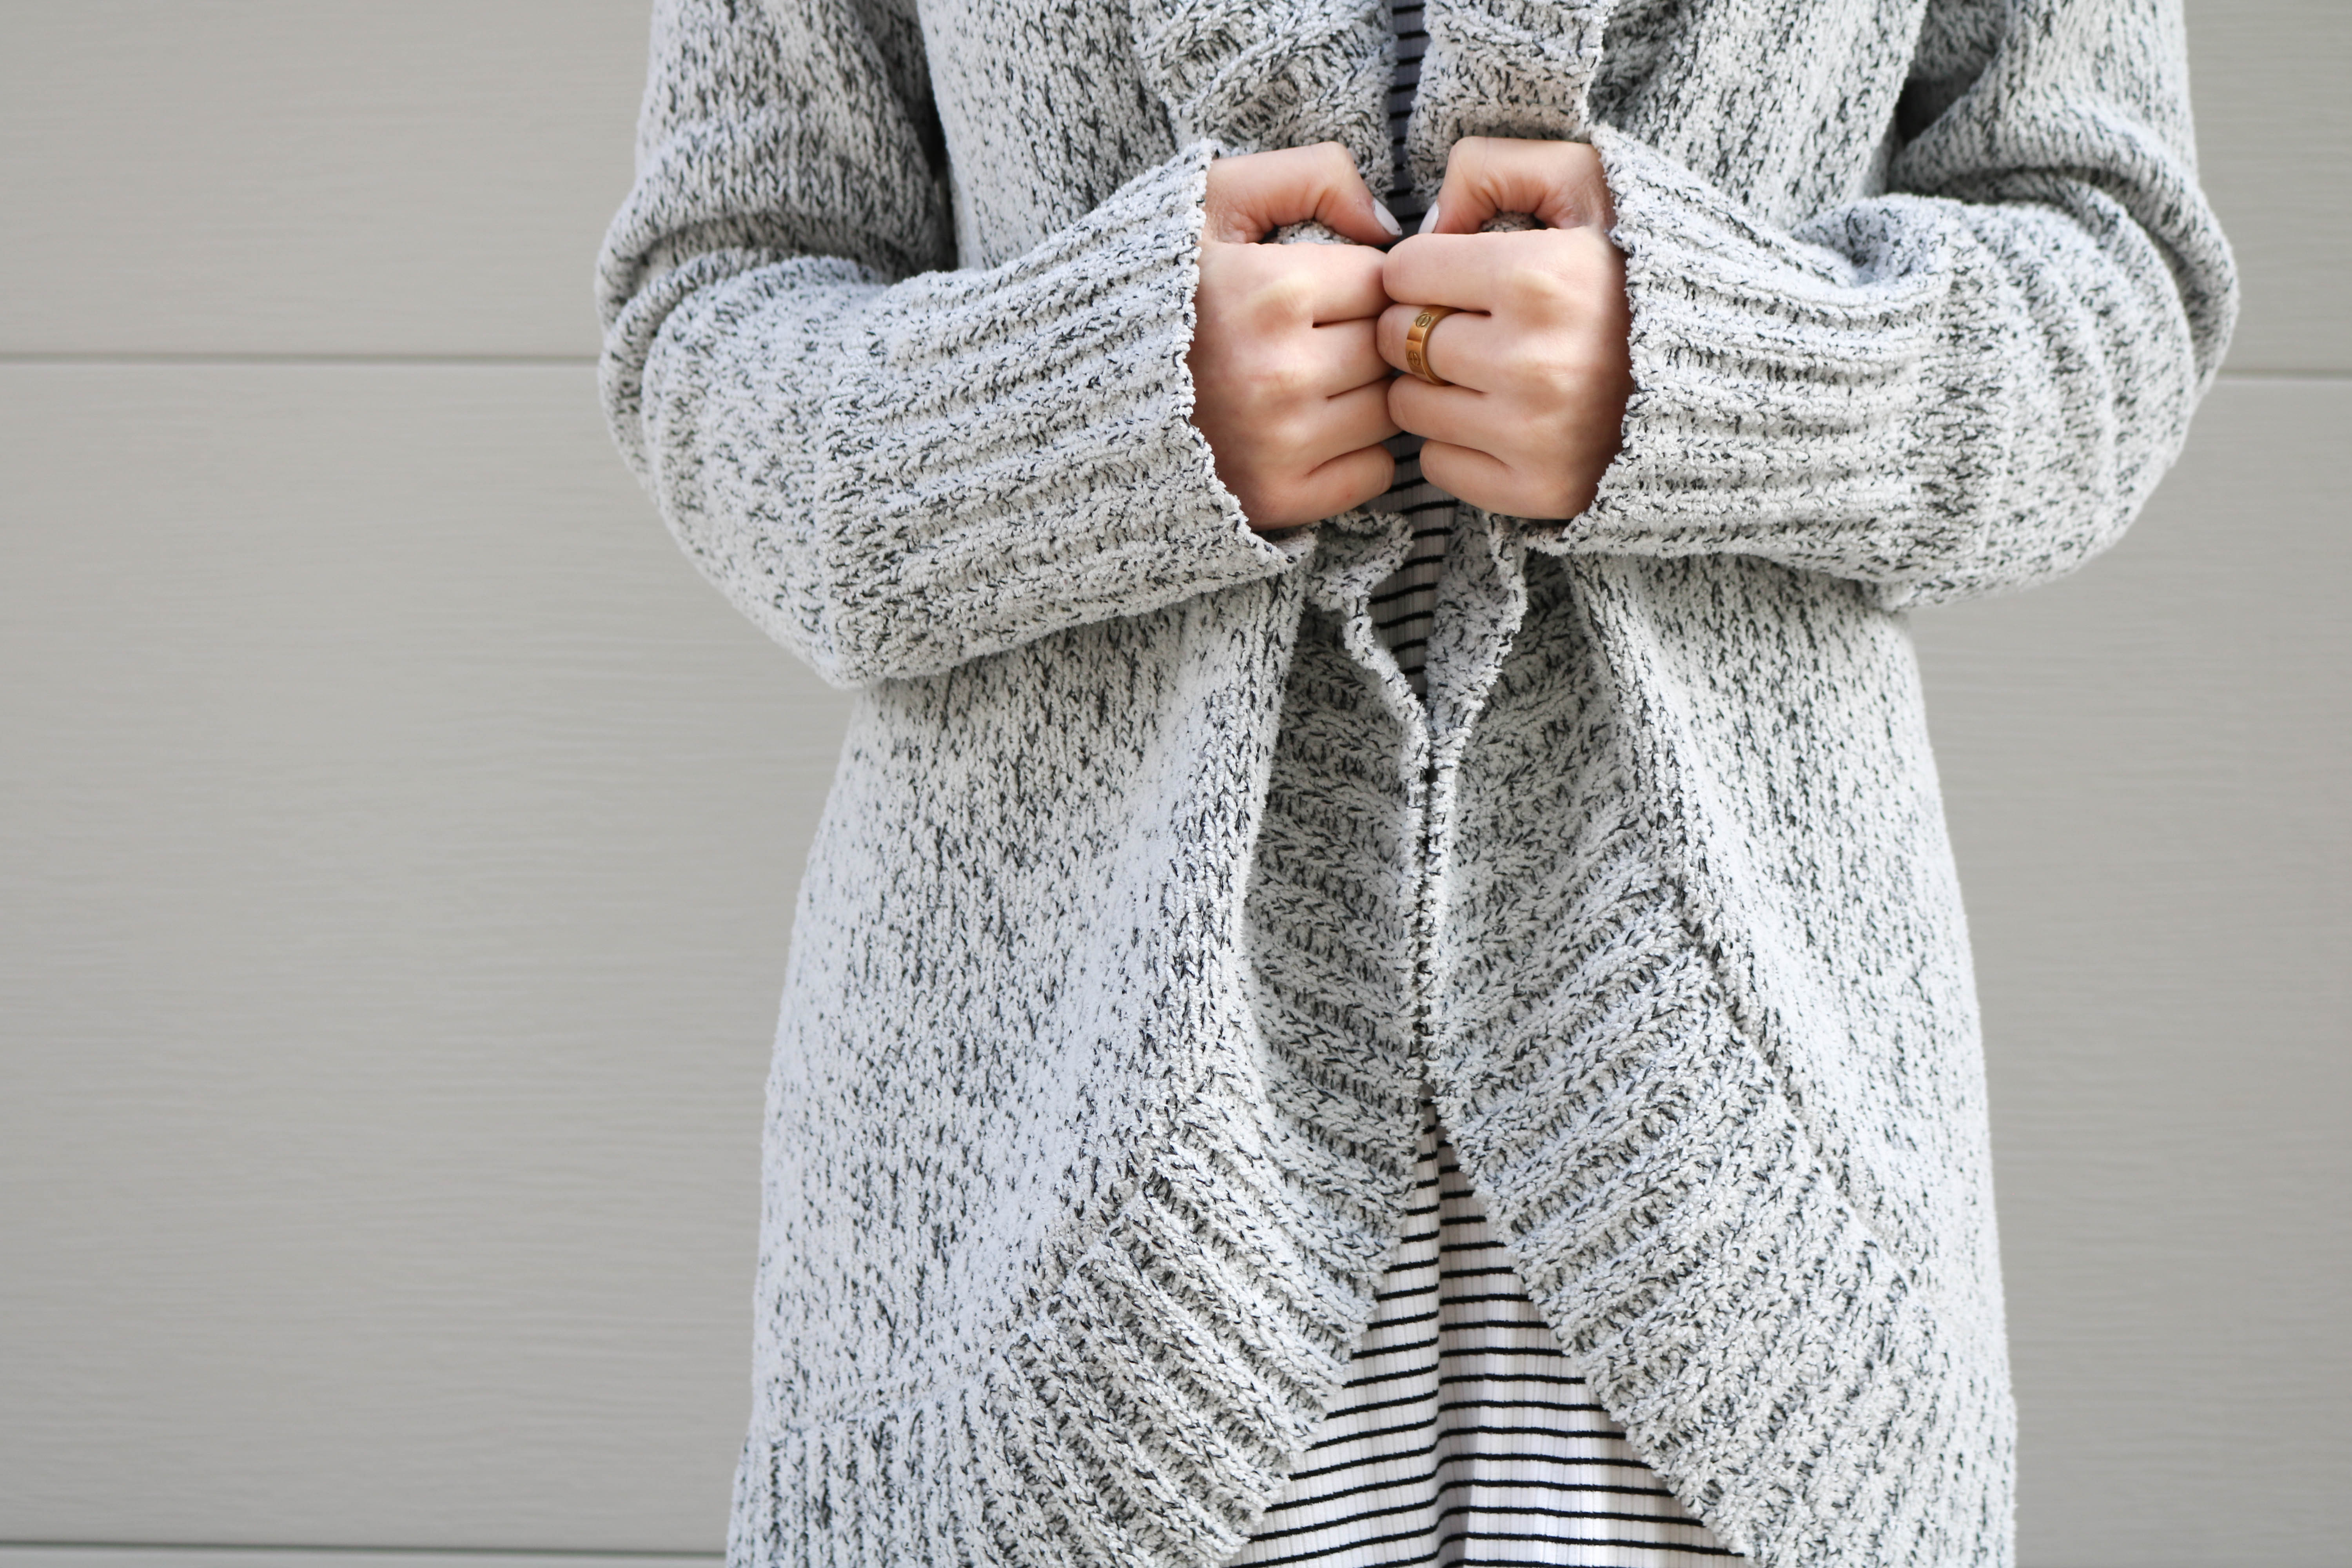 Chenille Cocoon Cardigan - The Blonder Life | The comfiest cardigan you will ever find, and now under $30! 